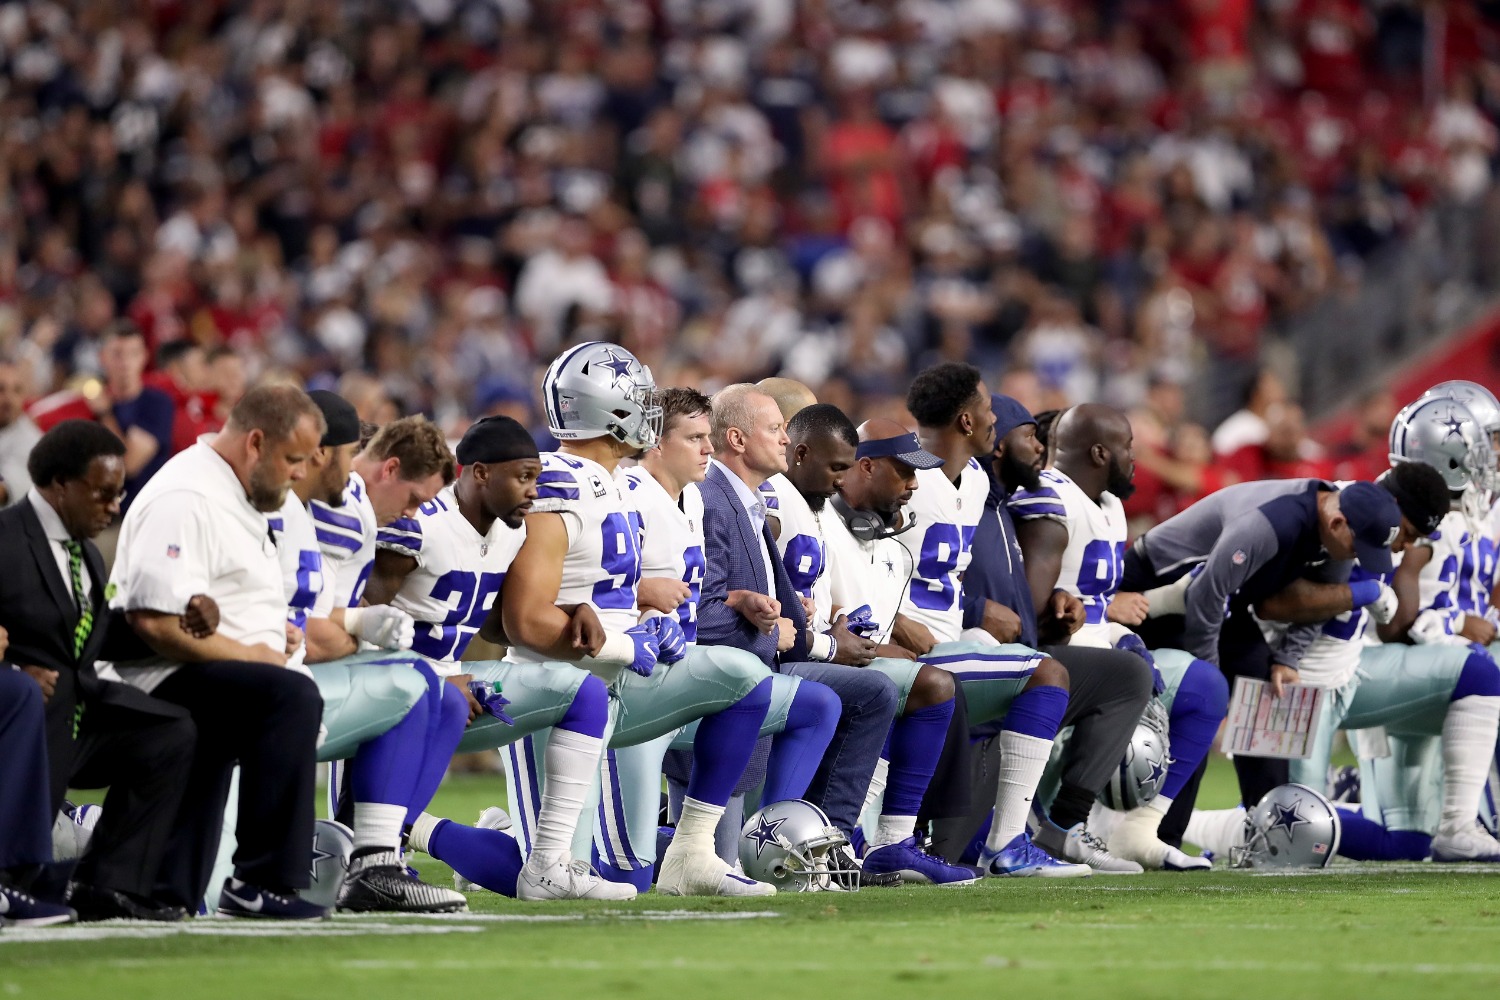 Jerry Jones just sent a clear message about Cowboys players kneeling during the national anthem.